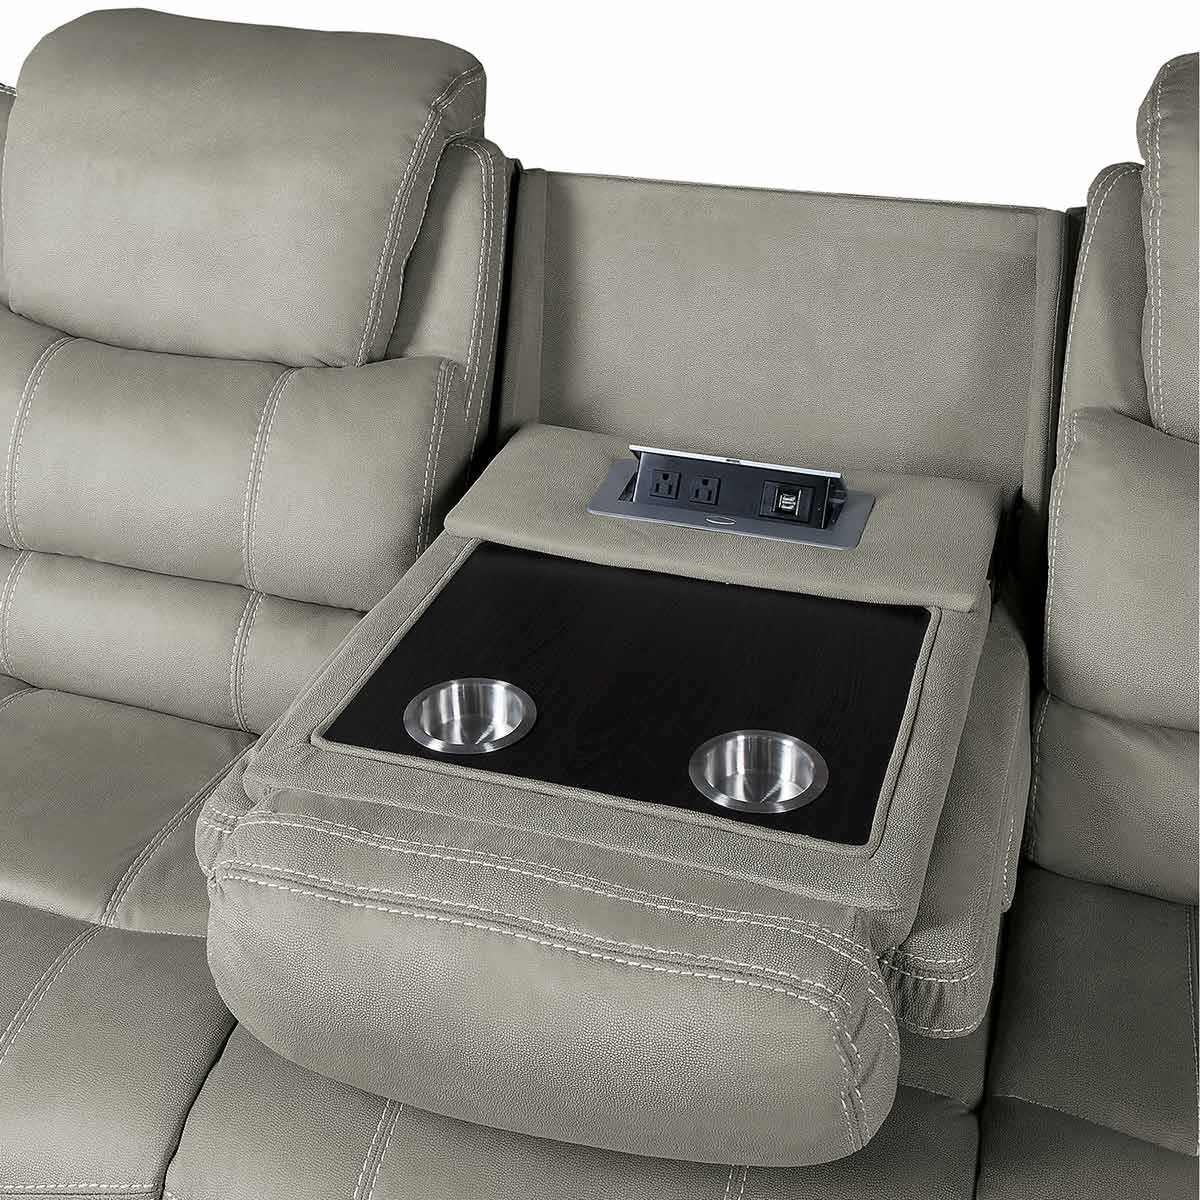 Homelegance Shola Double Reclining Sofa with Drop-Down Cup holders and Receptacles - Gray